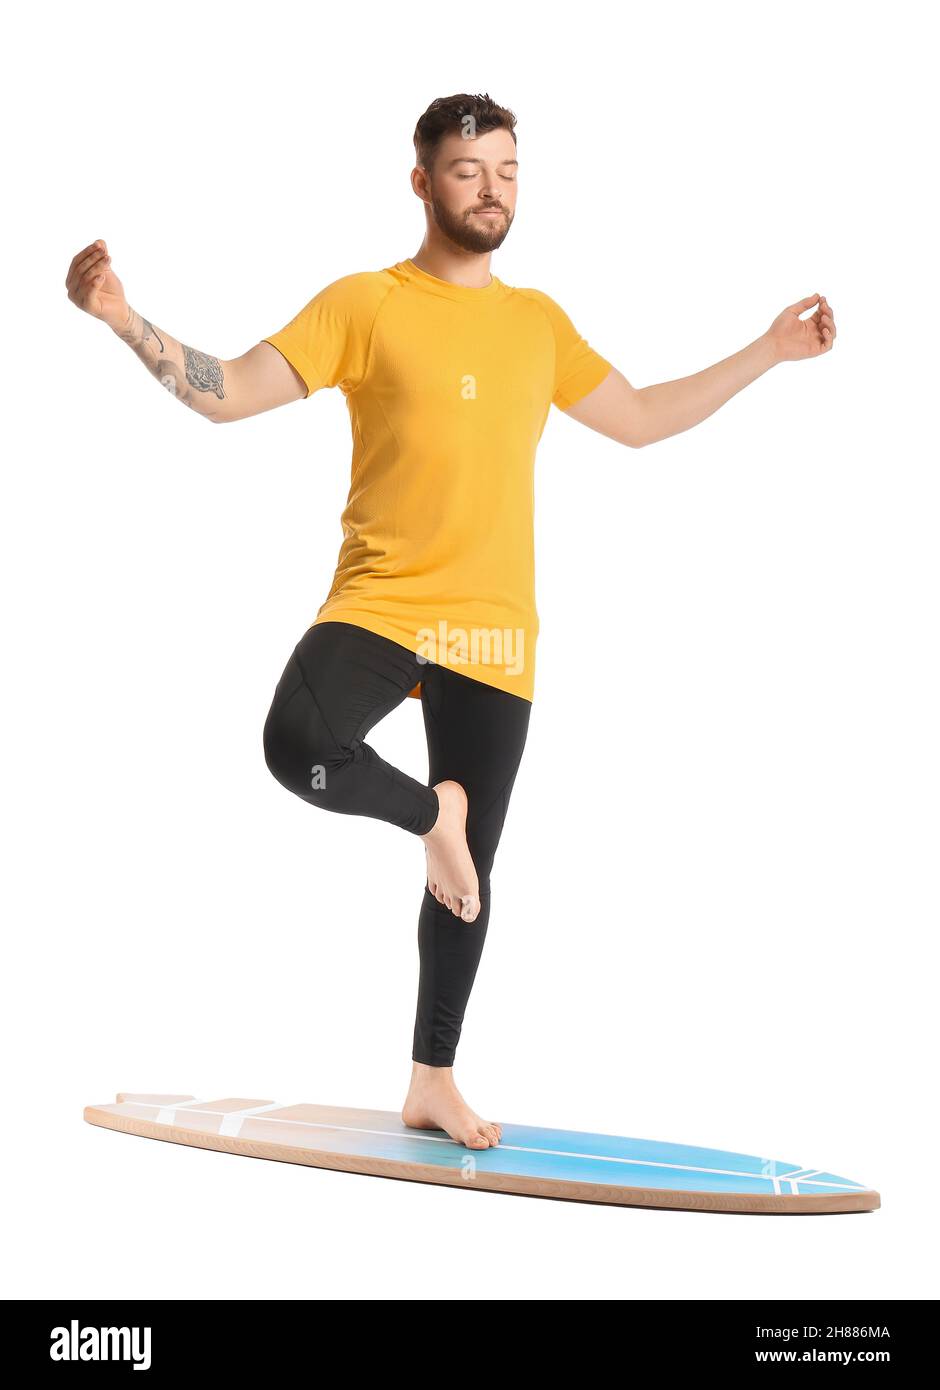 Handsome bearded man with surfboard meditating on white background Stock Photo